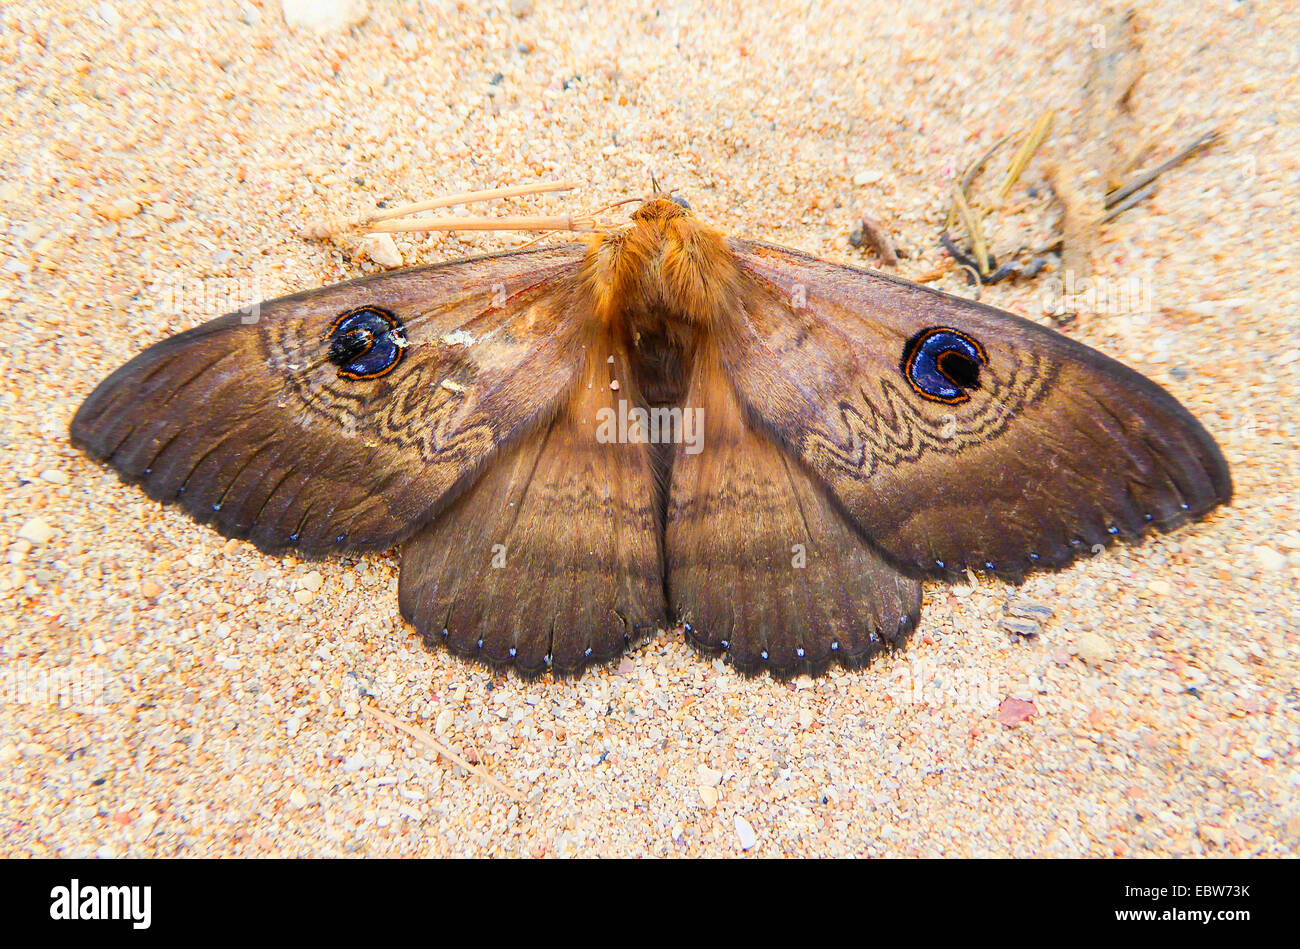 Southern Old Lady Moth (Dasypodia selenophora), lying with open wings on the sand, Australia, Western Australia Stock Photo